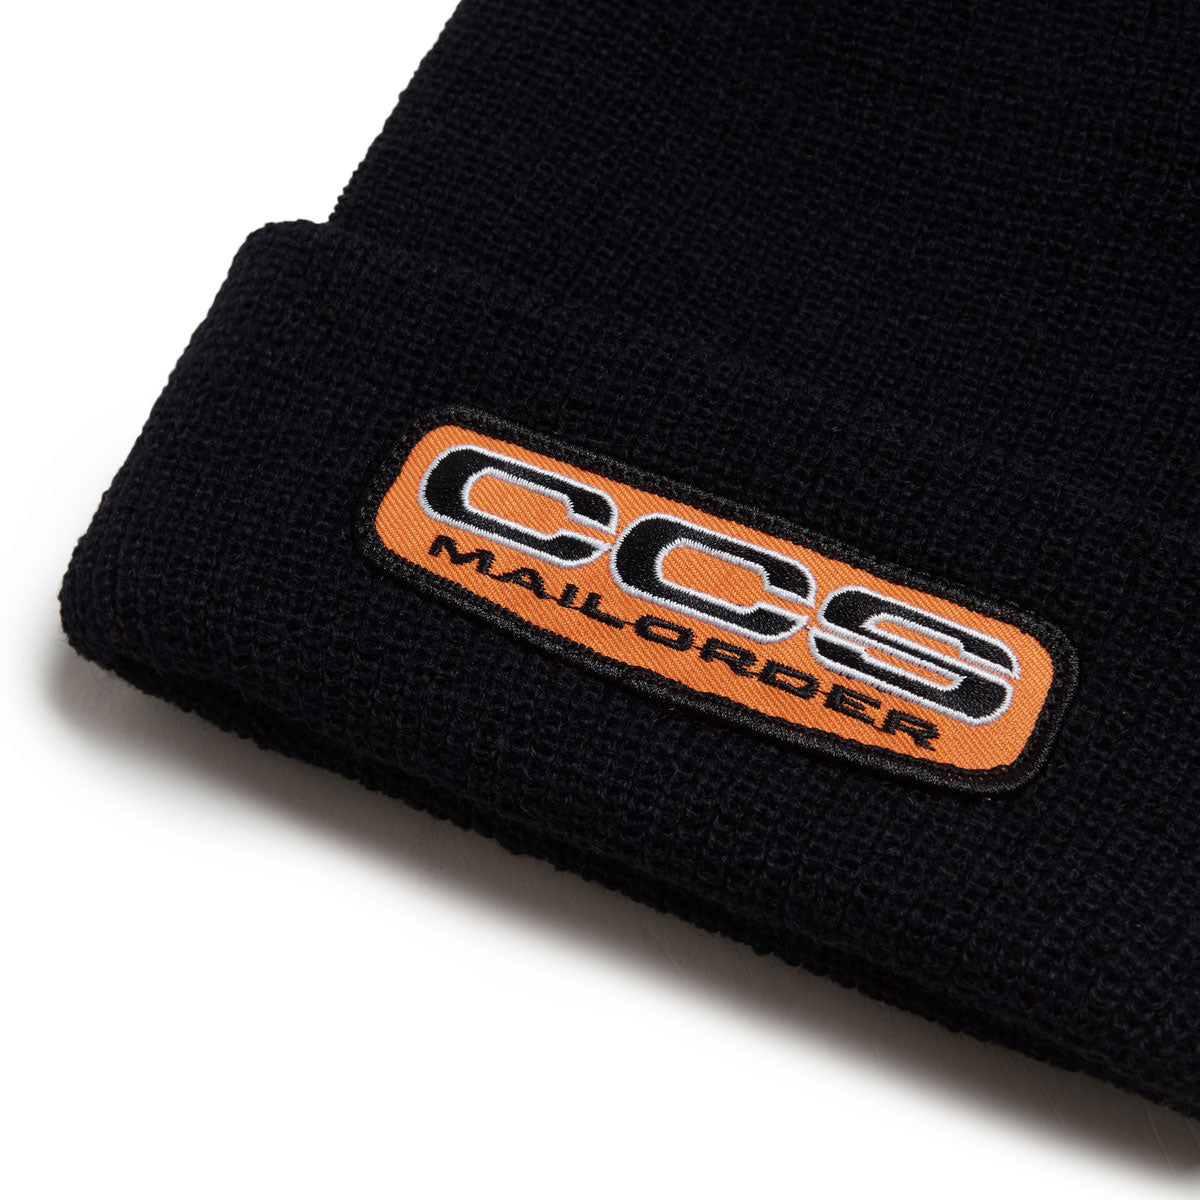 CCS Mailorder Patch Beanie - Black image 2